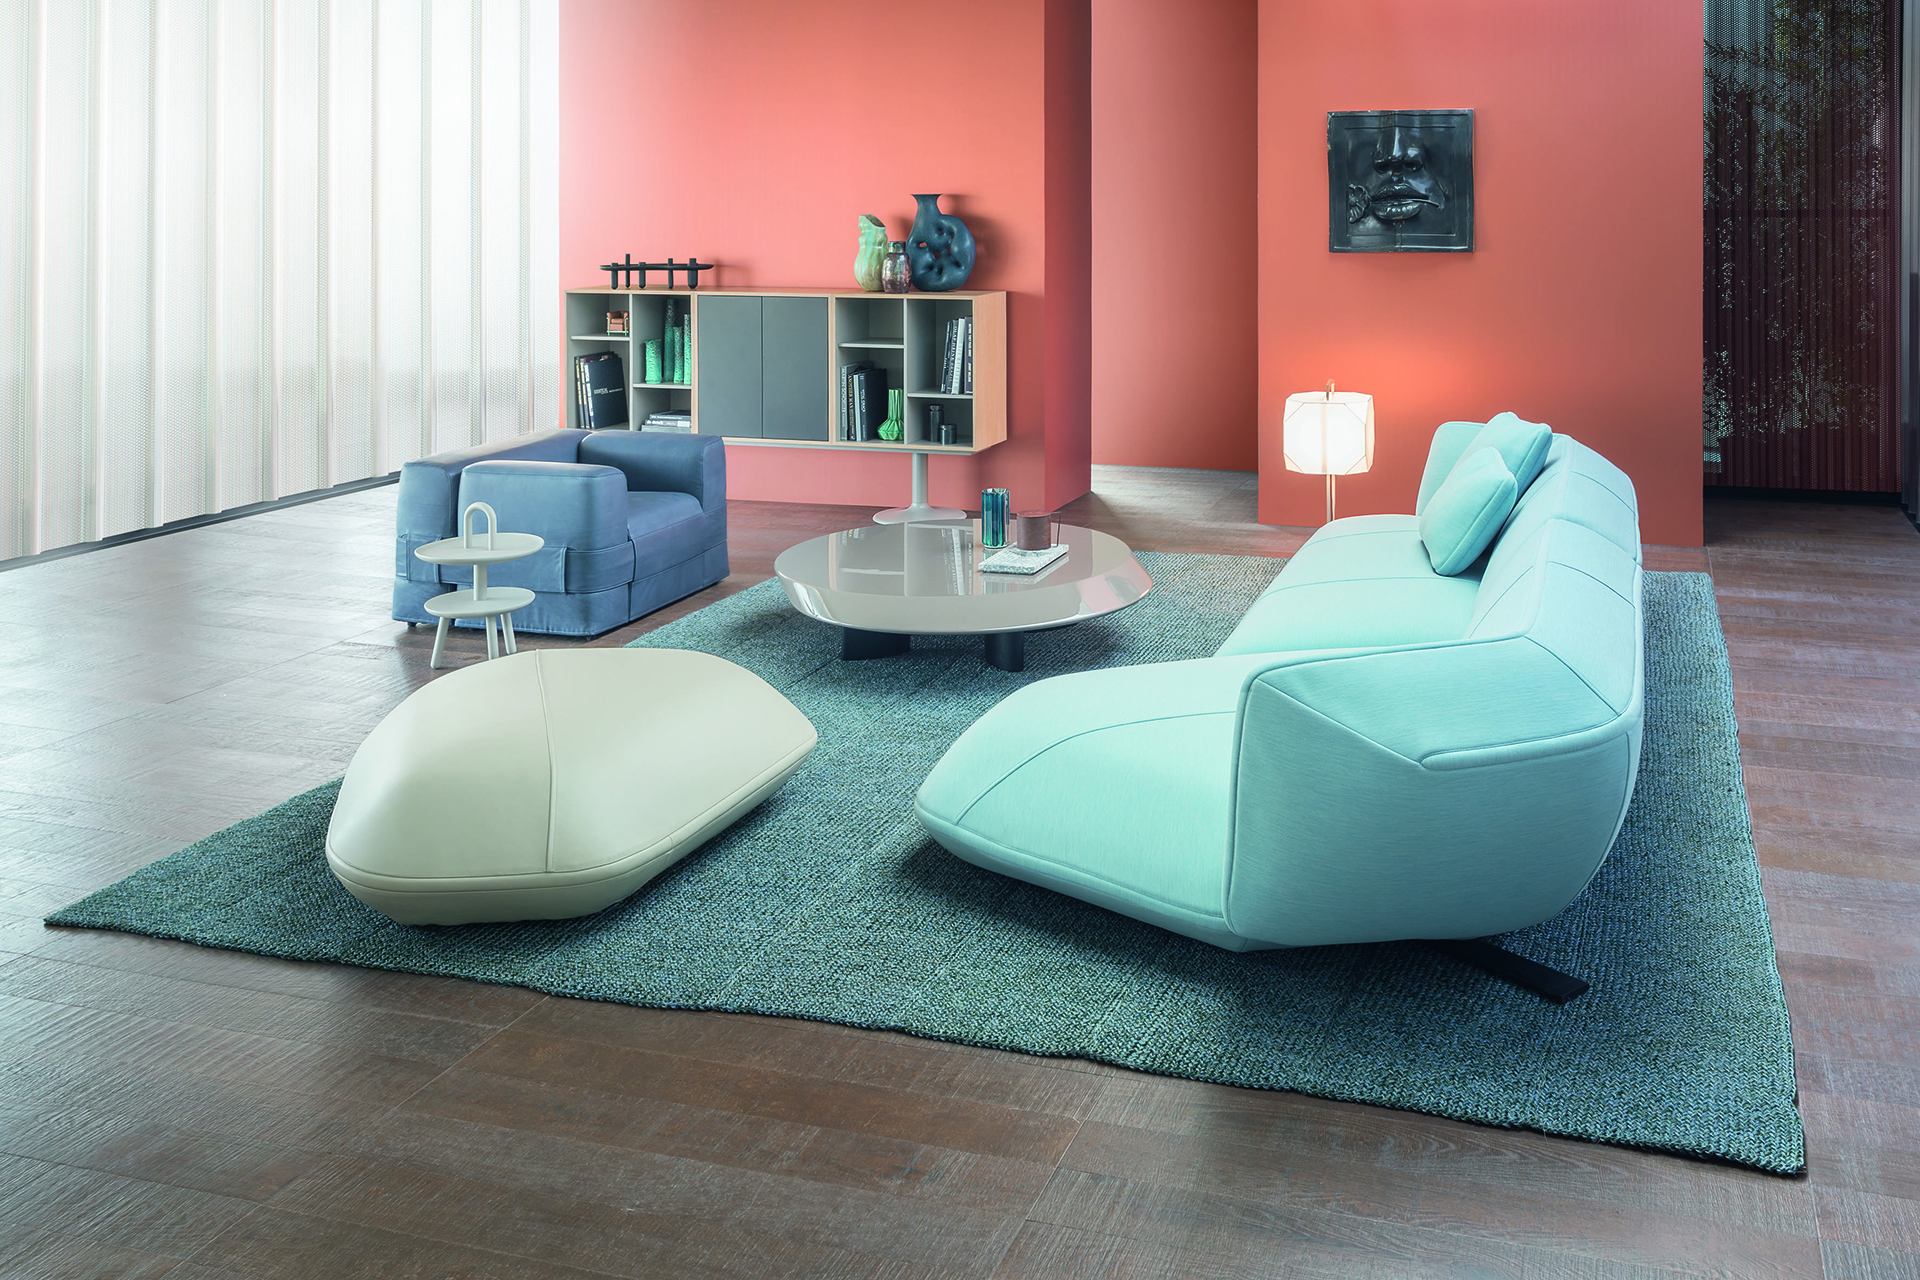 Cassina Recreates Iconic Charlotte Perriand Pieces for New Louis Vuitton  Show